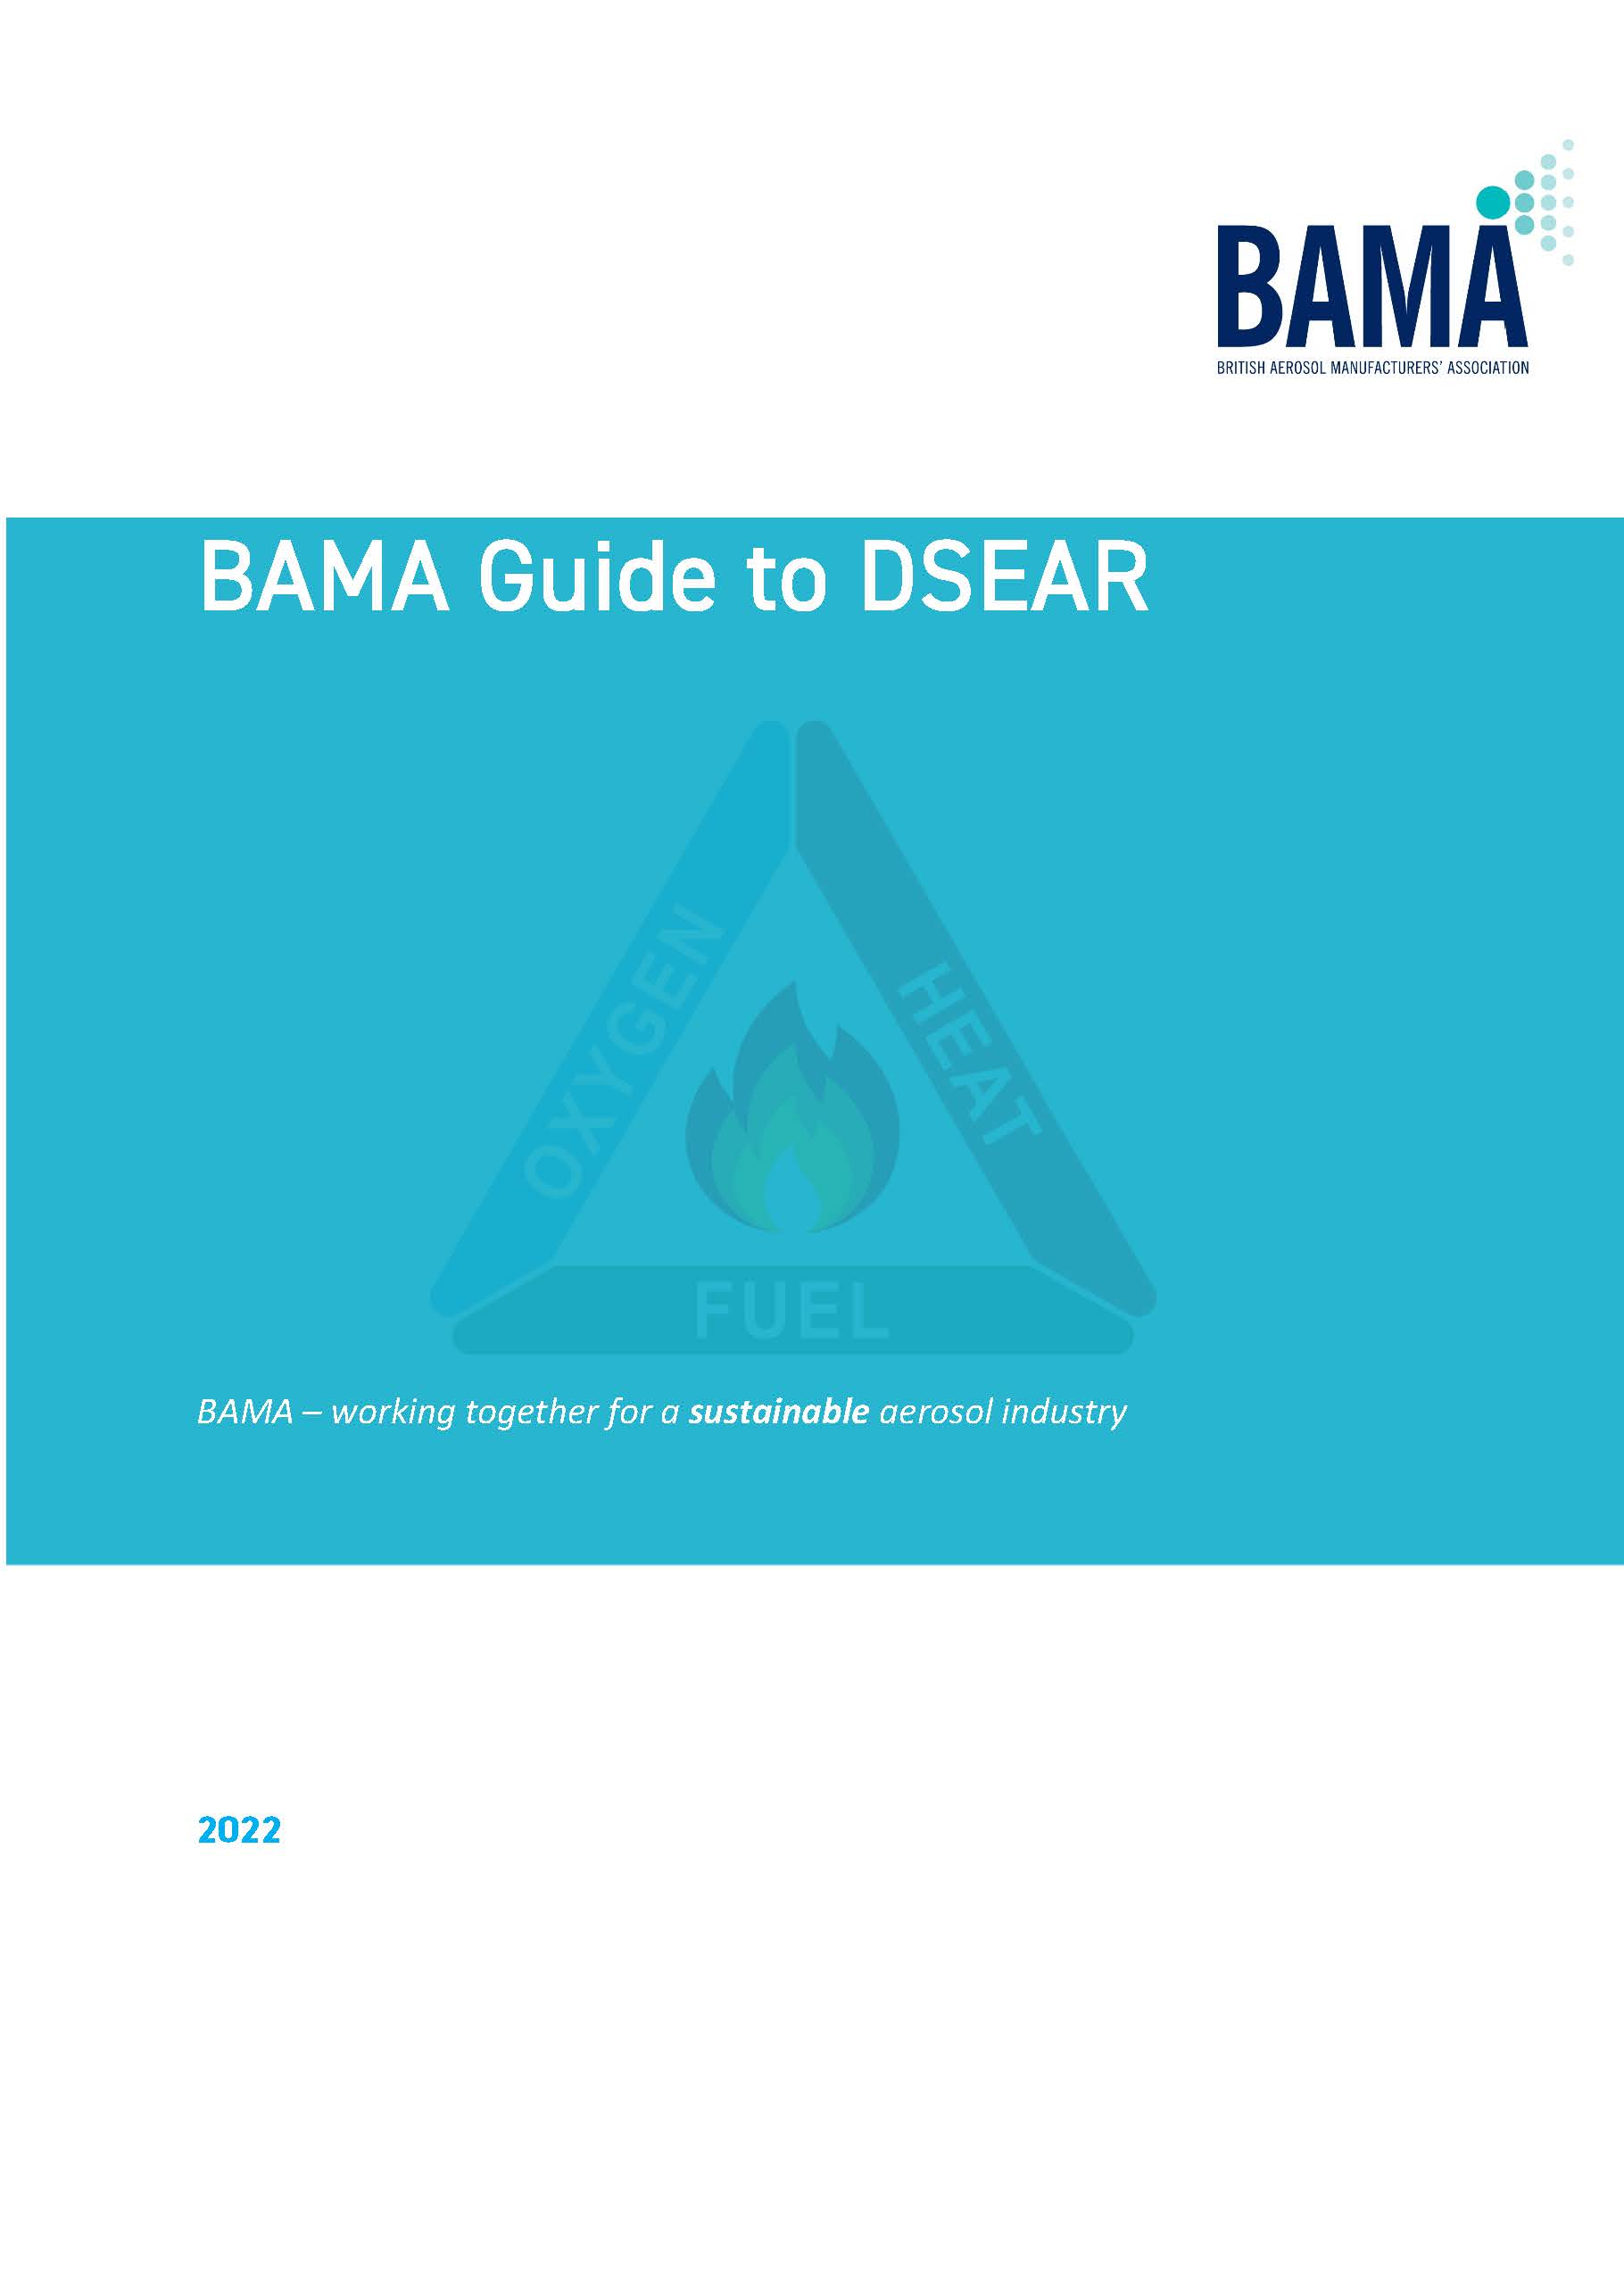 BAMA Guide to DSEAR